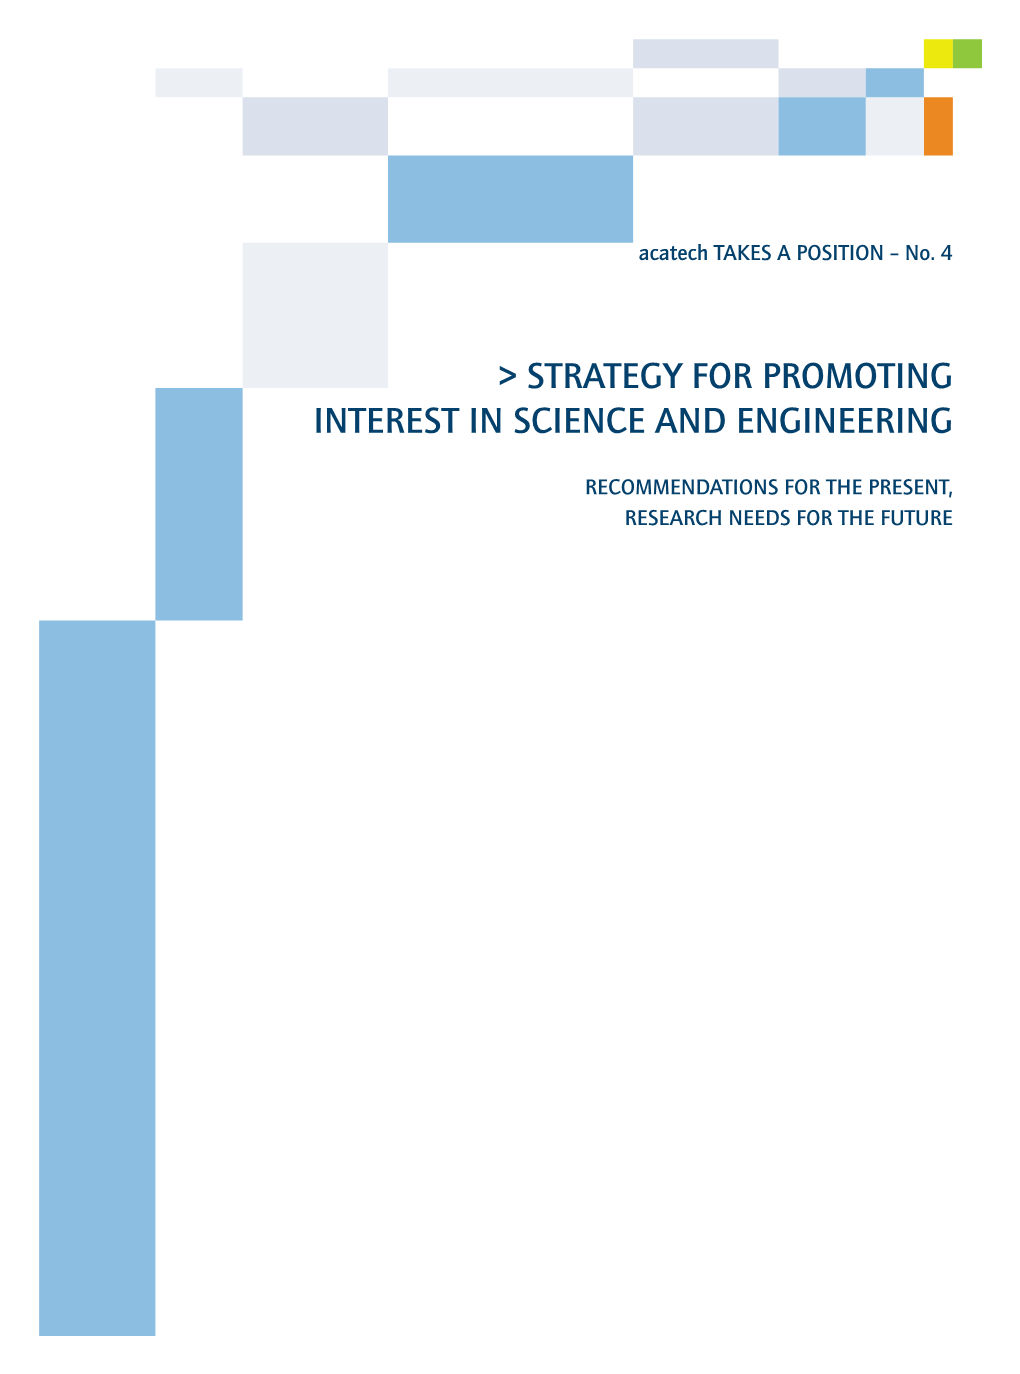 Strategy for Promoting Interest in Science and Engineering